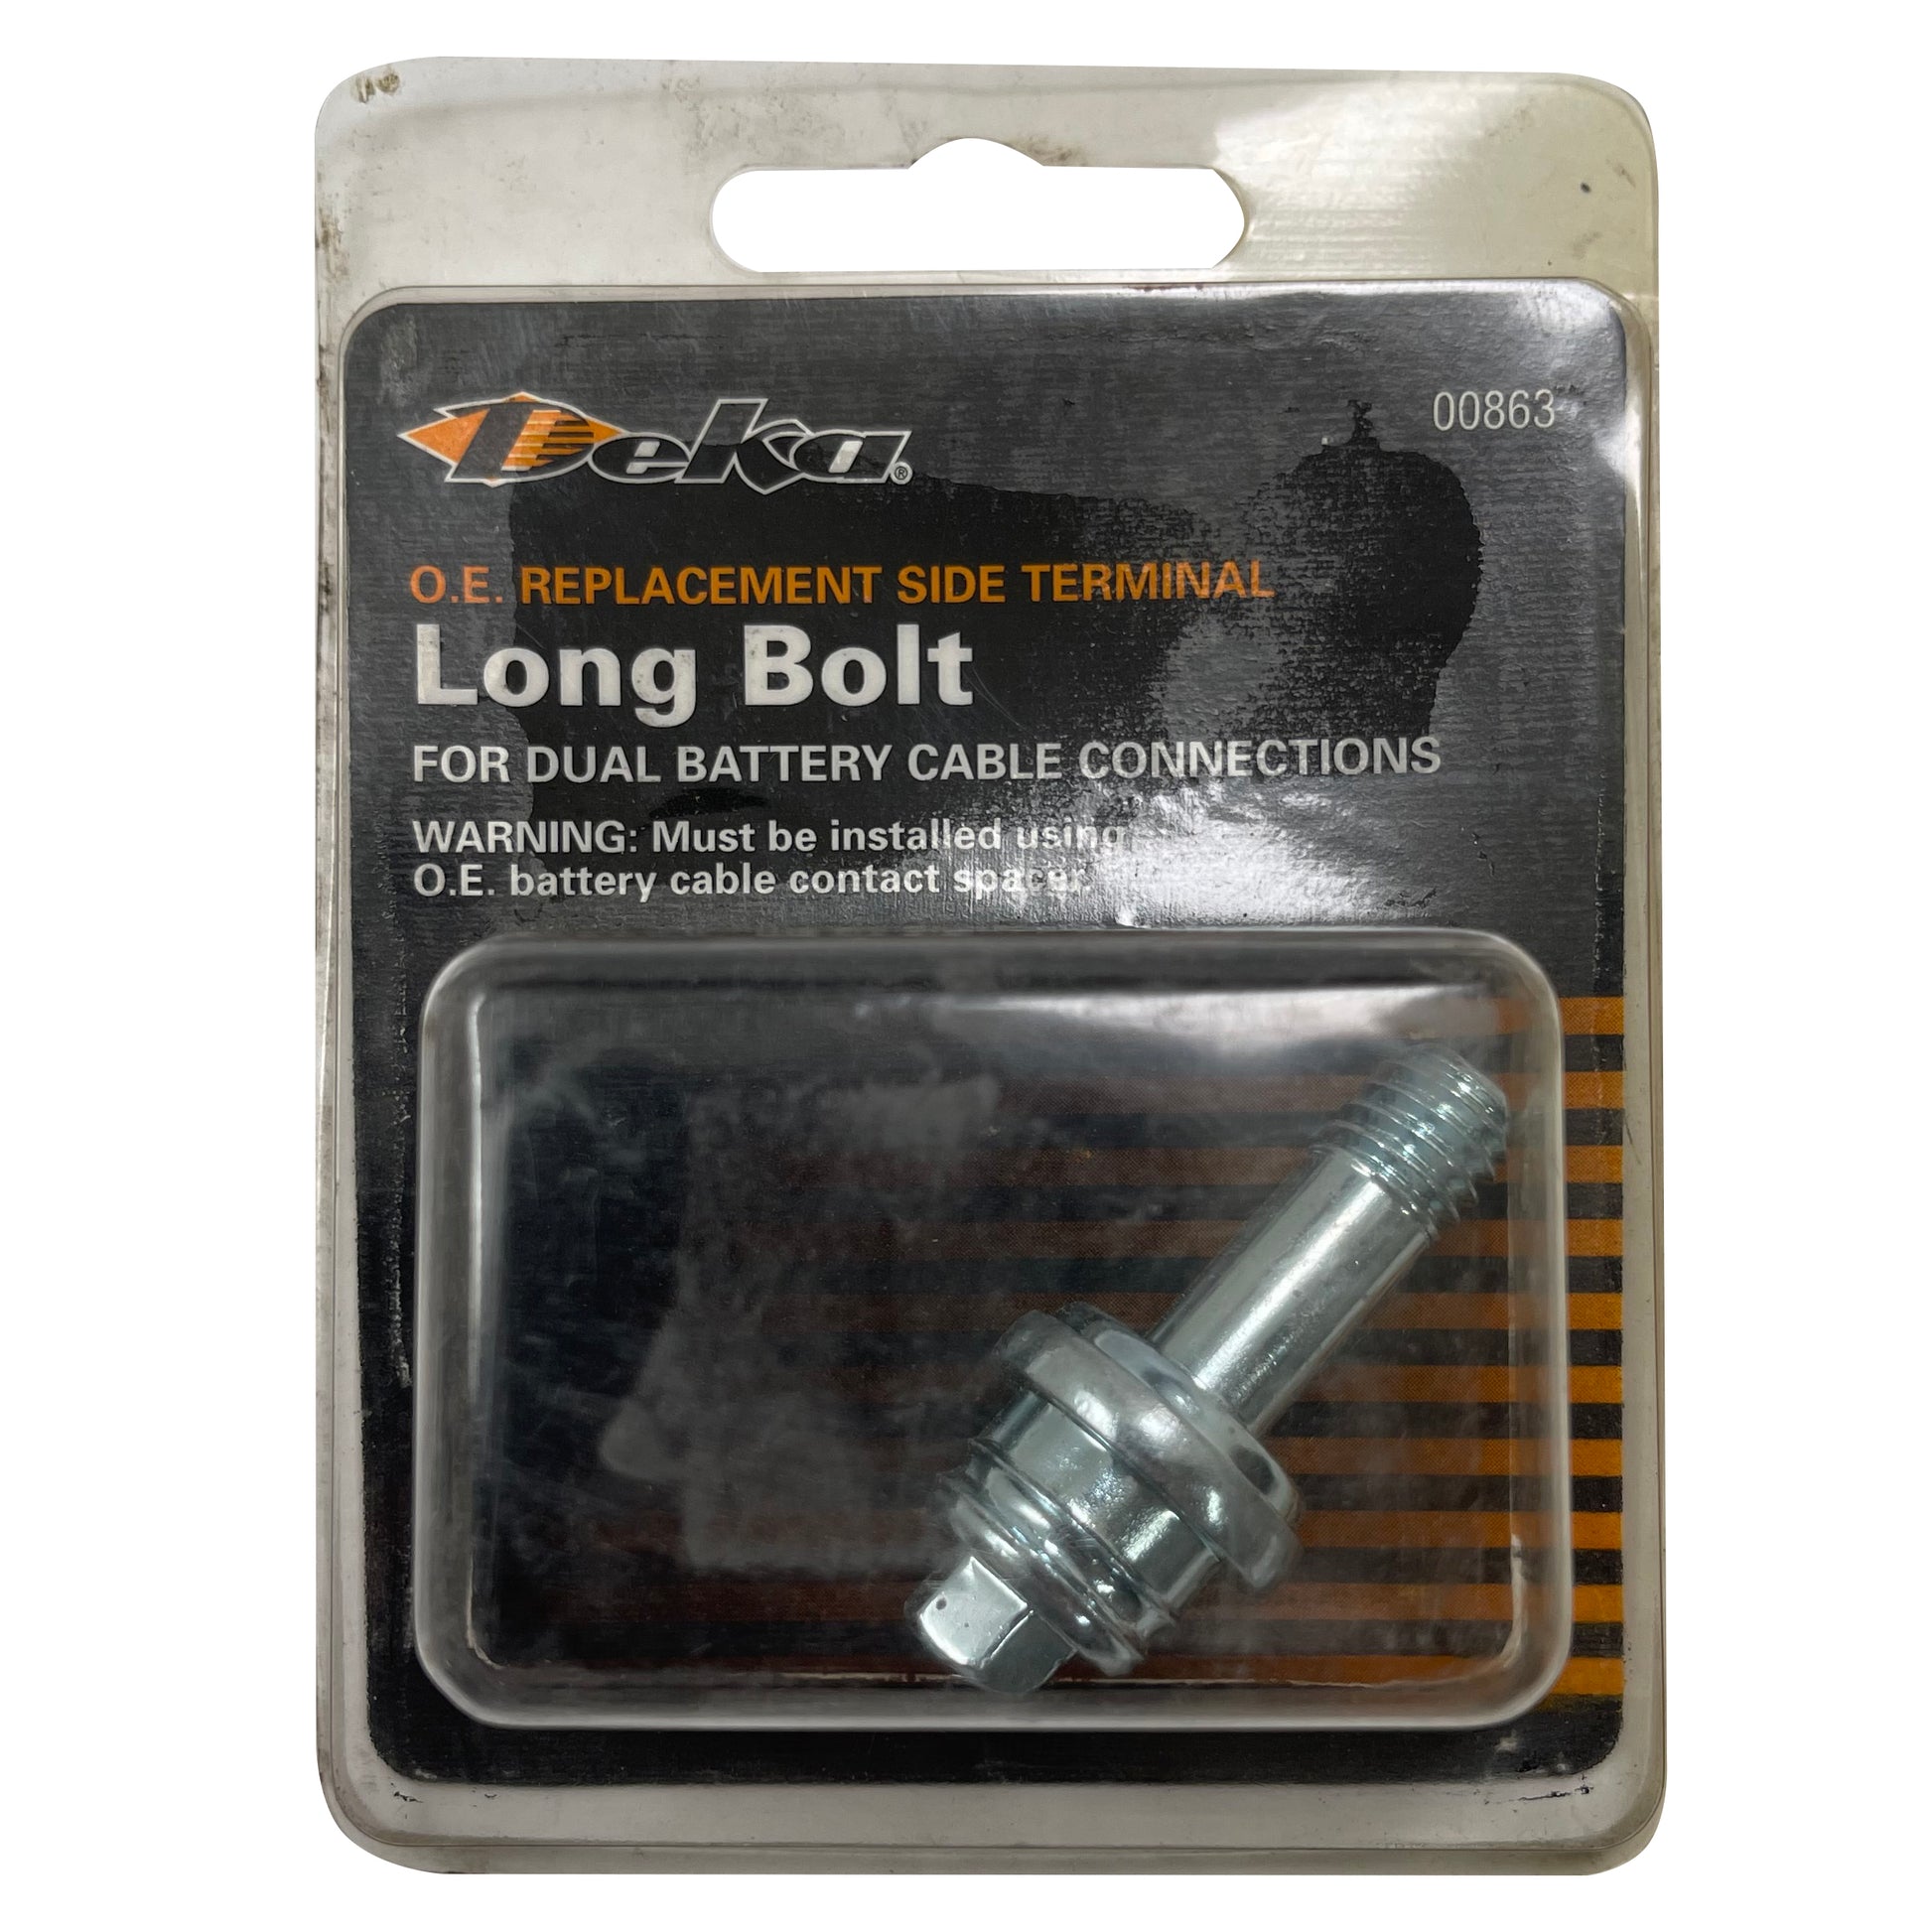 OEM Replacement Side Terminal Battery Long Bolt for Dual Battery